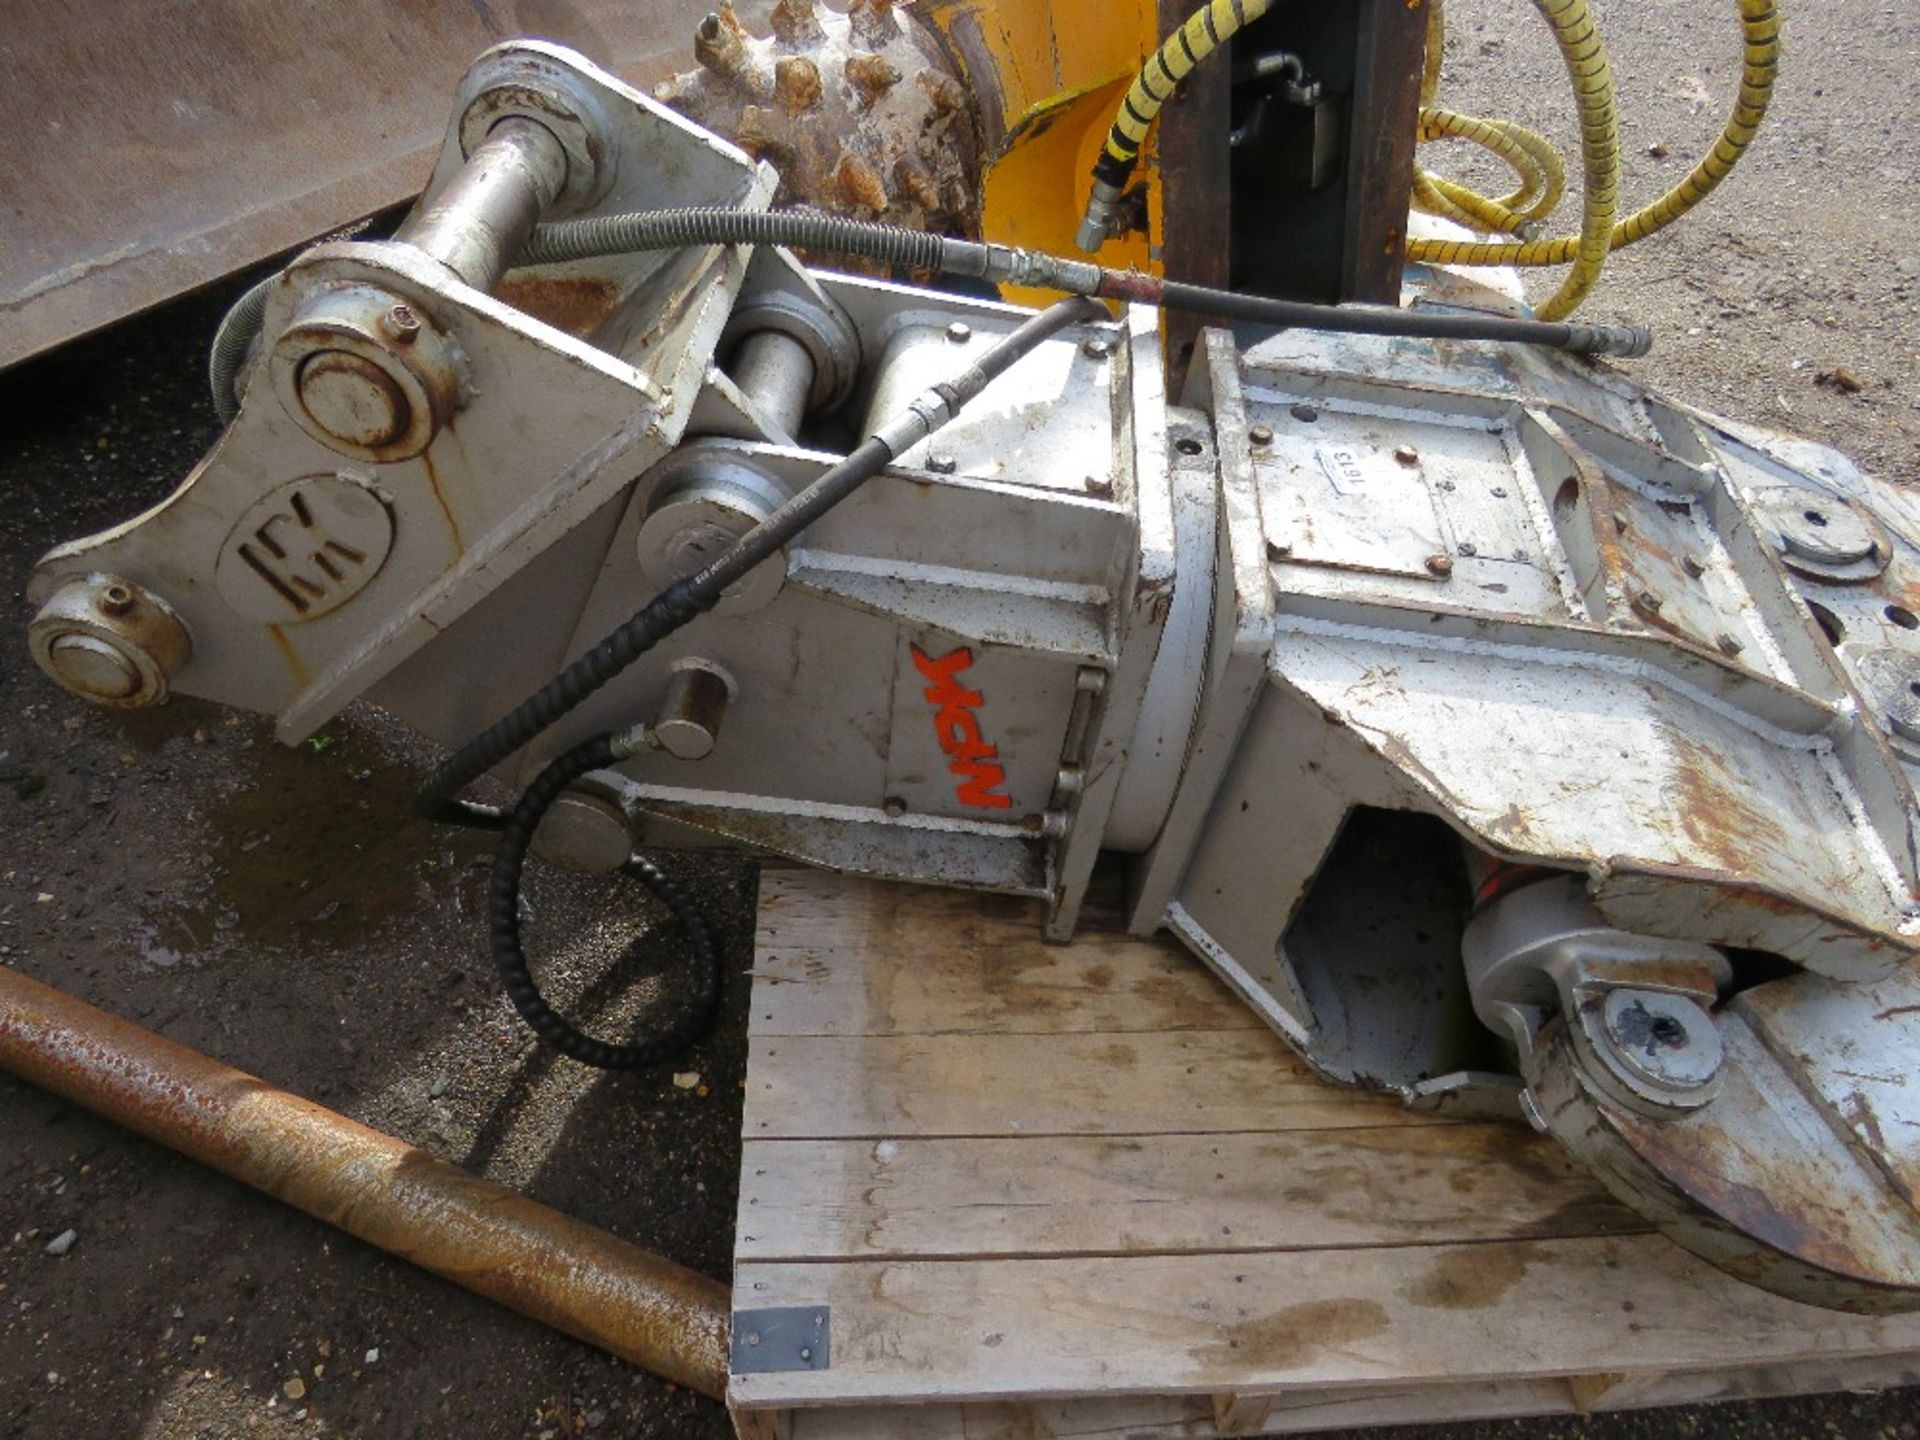 SET OF NPK S7X CRUSHER JAWS, EXCAVATOR MOUNTED ON 65MM PINS. - Image 2 of 9